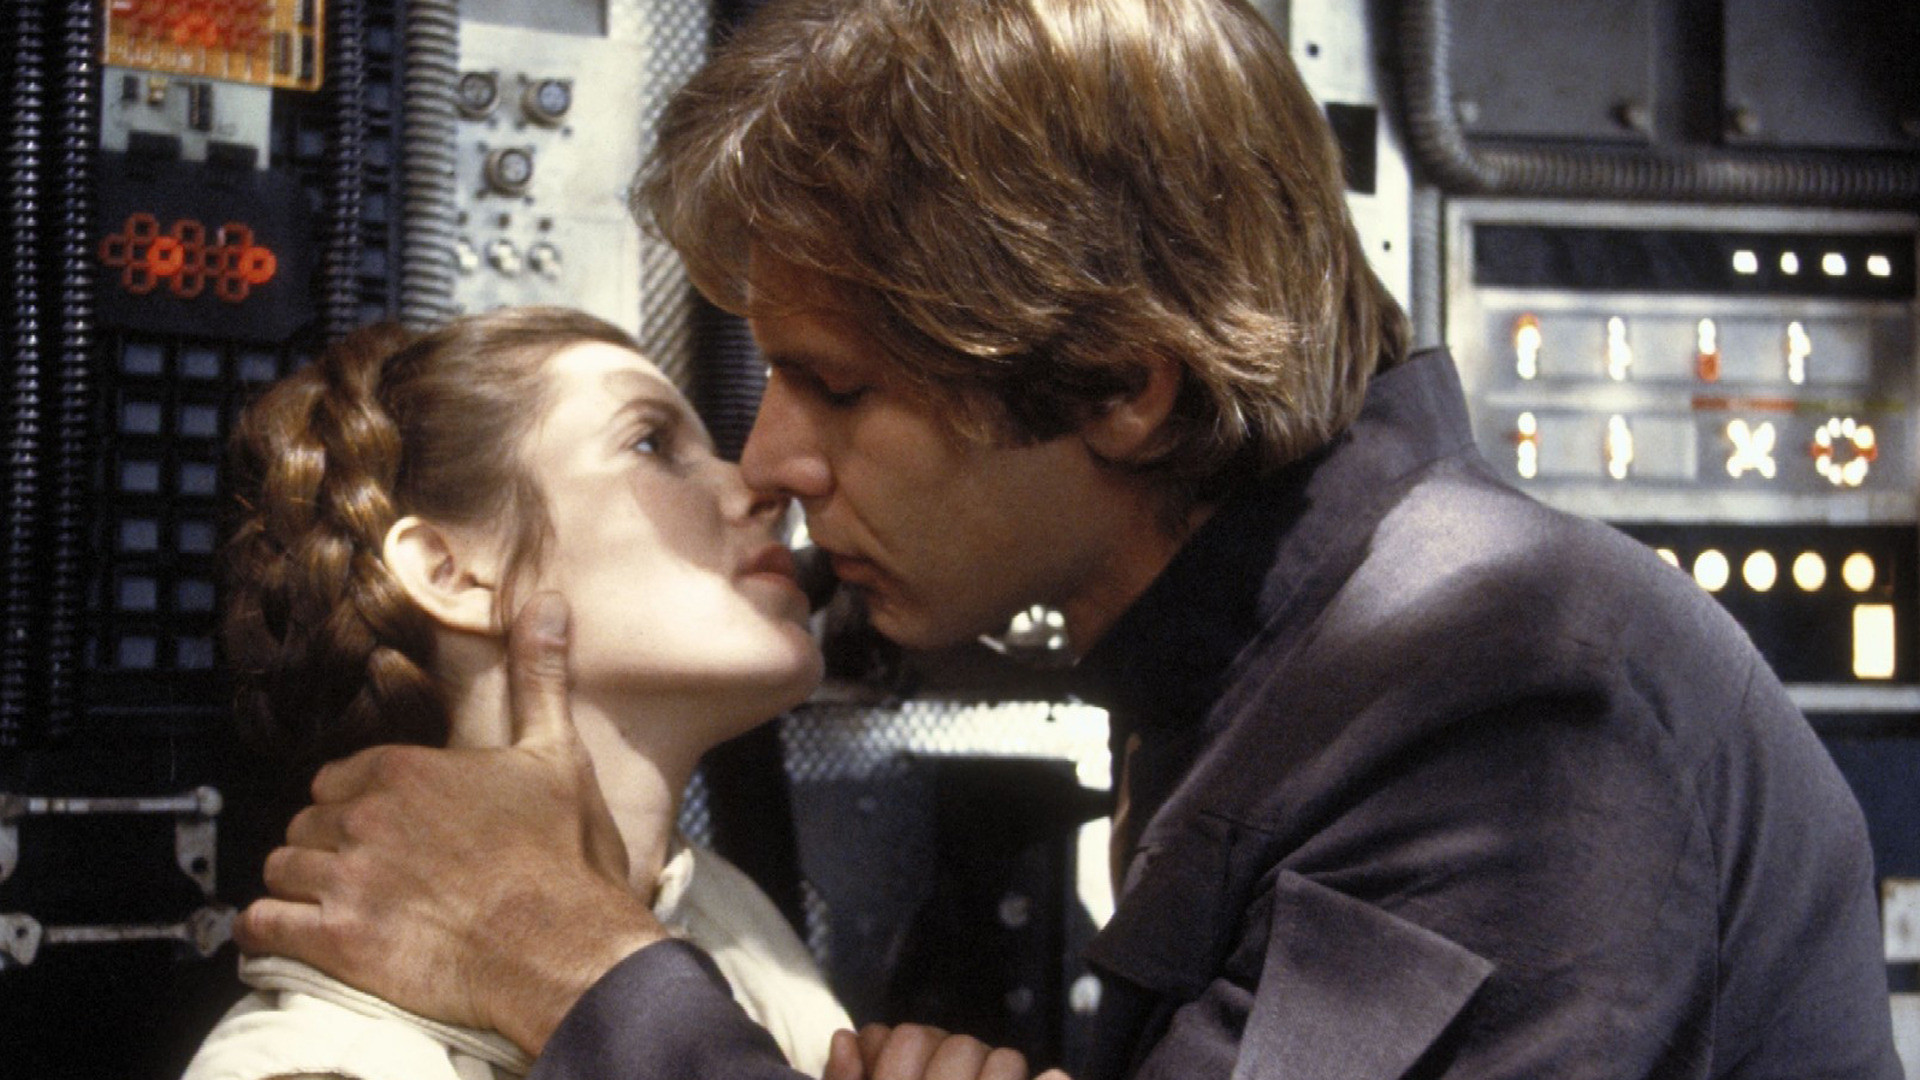 movie, star wars episode v: the empire strikes back, carrie fisher, han solo, harrison ford, princess leia, star wars